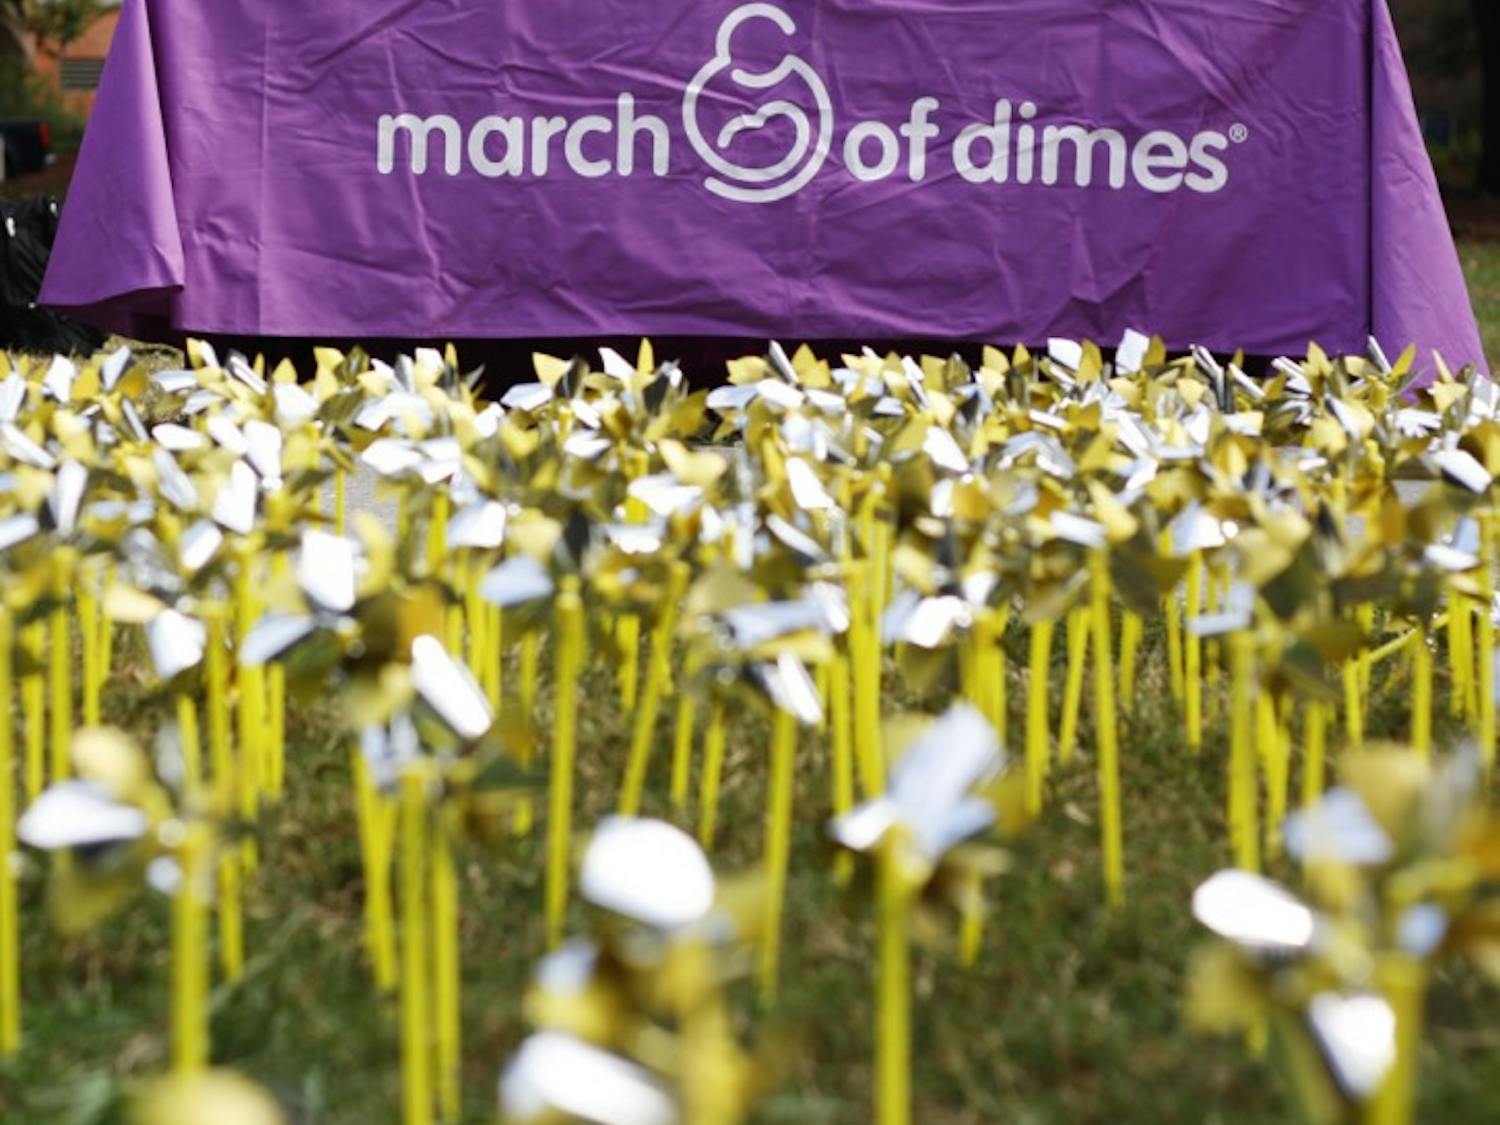 Pinwheels in the Plaza of the Americas raise awareness for the 9th annual Gators March for babies. The march will take place on Sunday, November 4th.